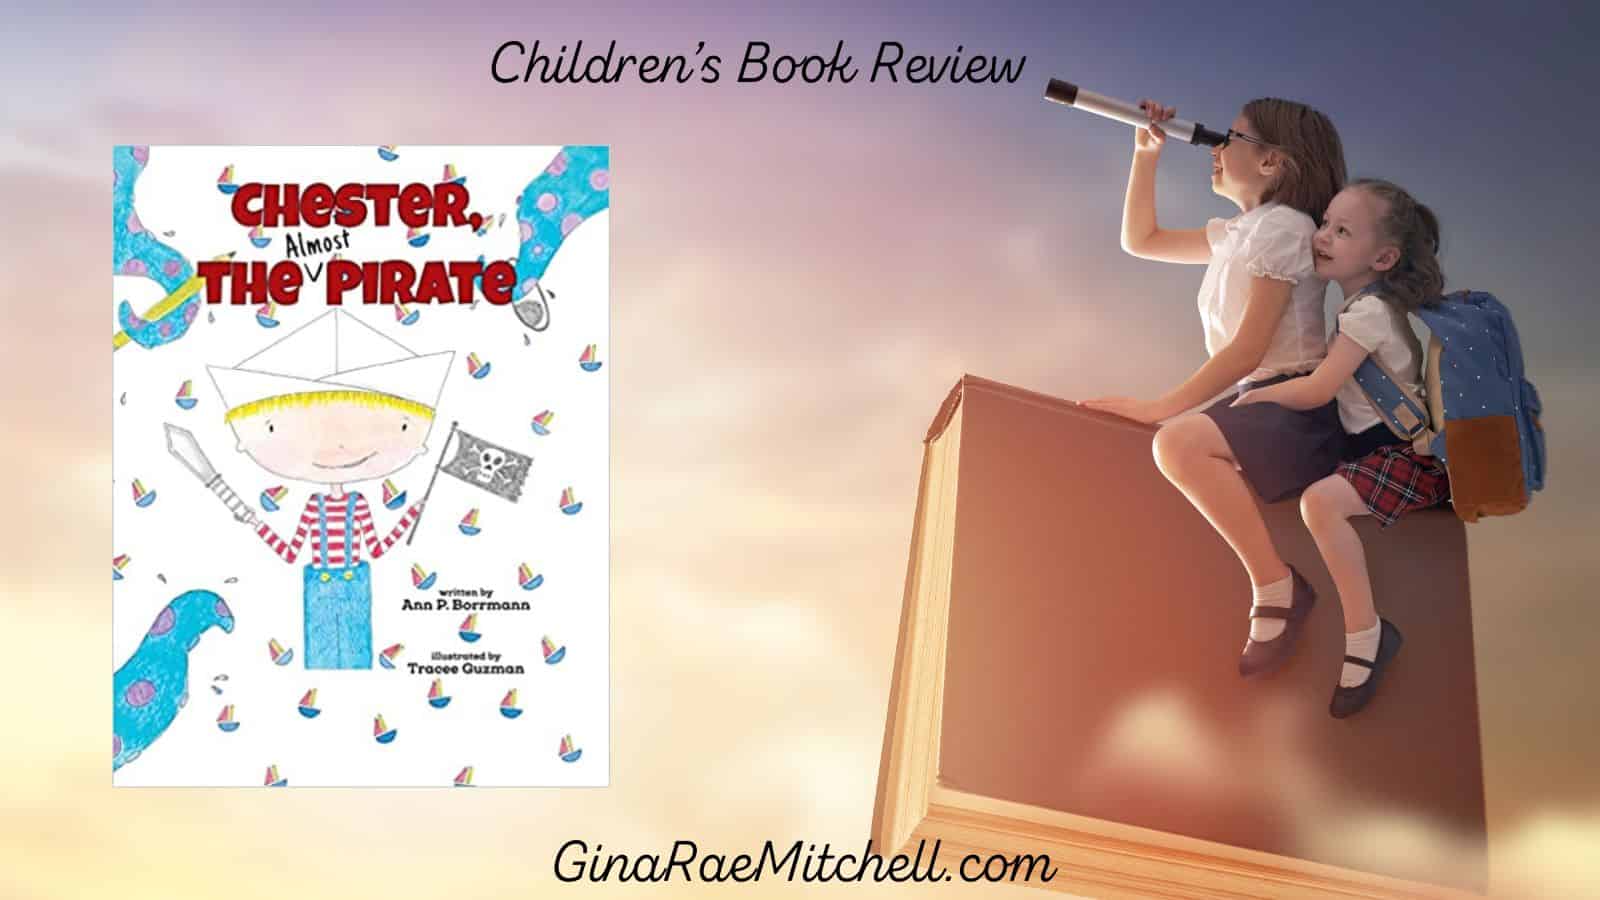 Chester the Almost Pirate by Ann P. Borrmann | Children's Book Review | 5-Stars | Fun for Families!